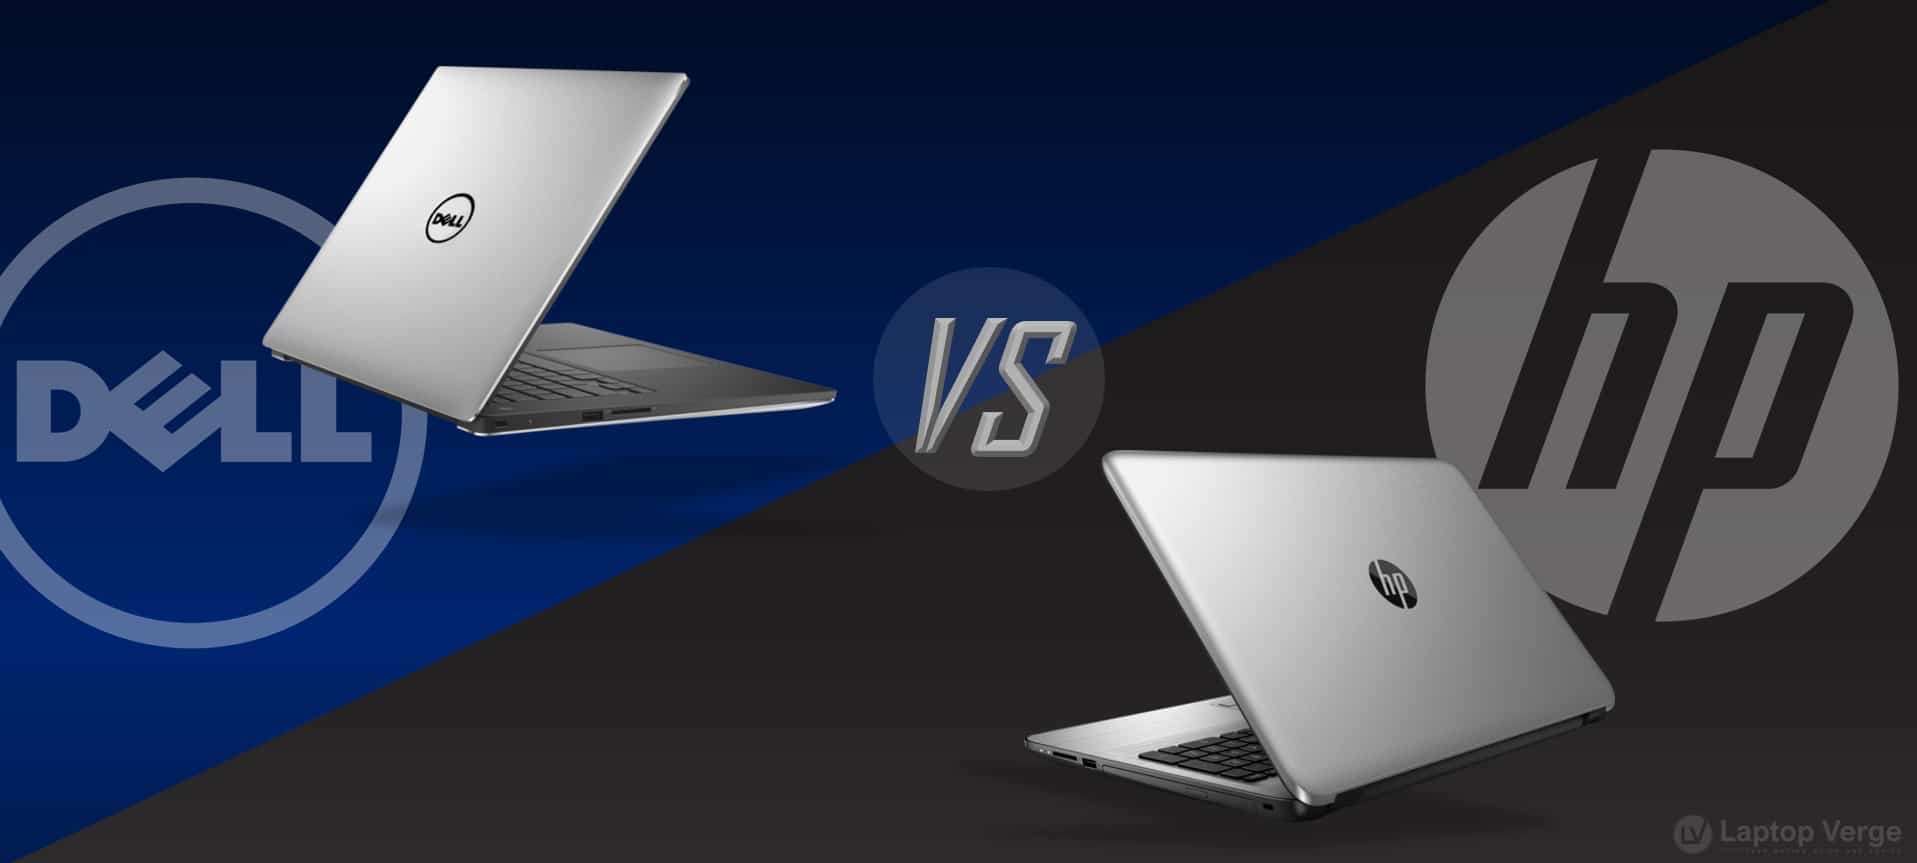 Dell Vs Hp Which Brand Is Better And Why In 21 Laptop Verge